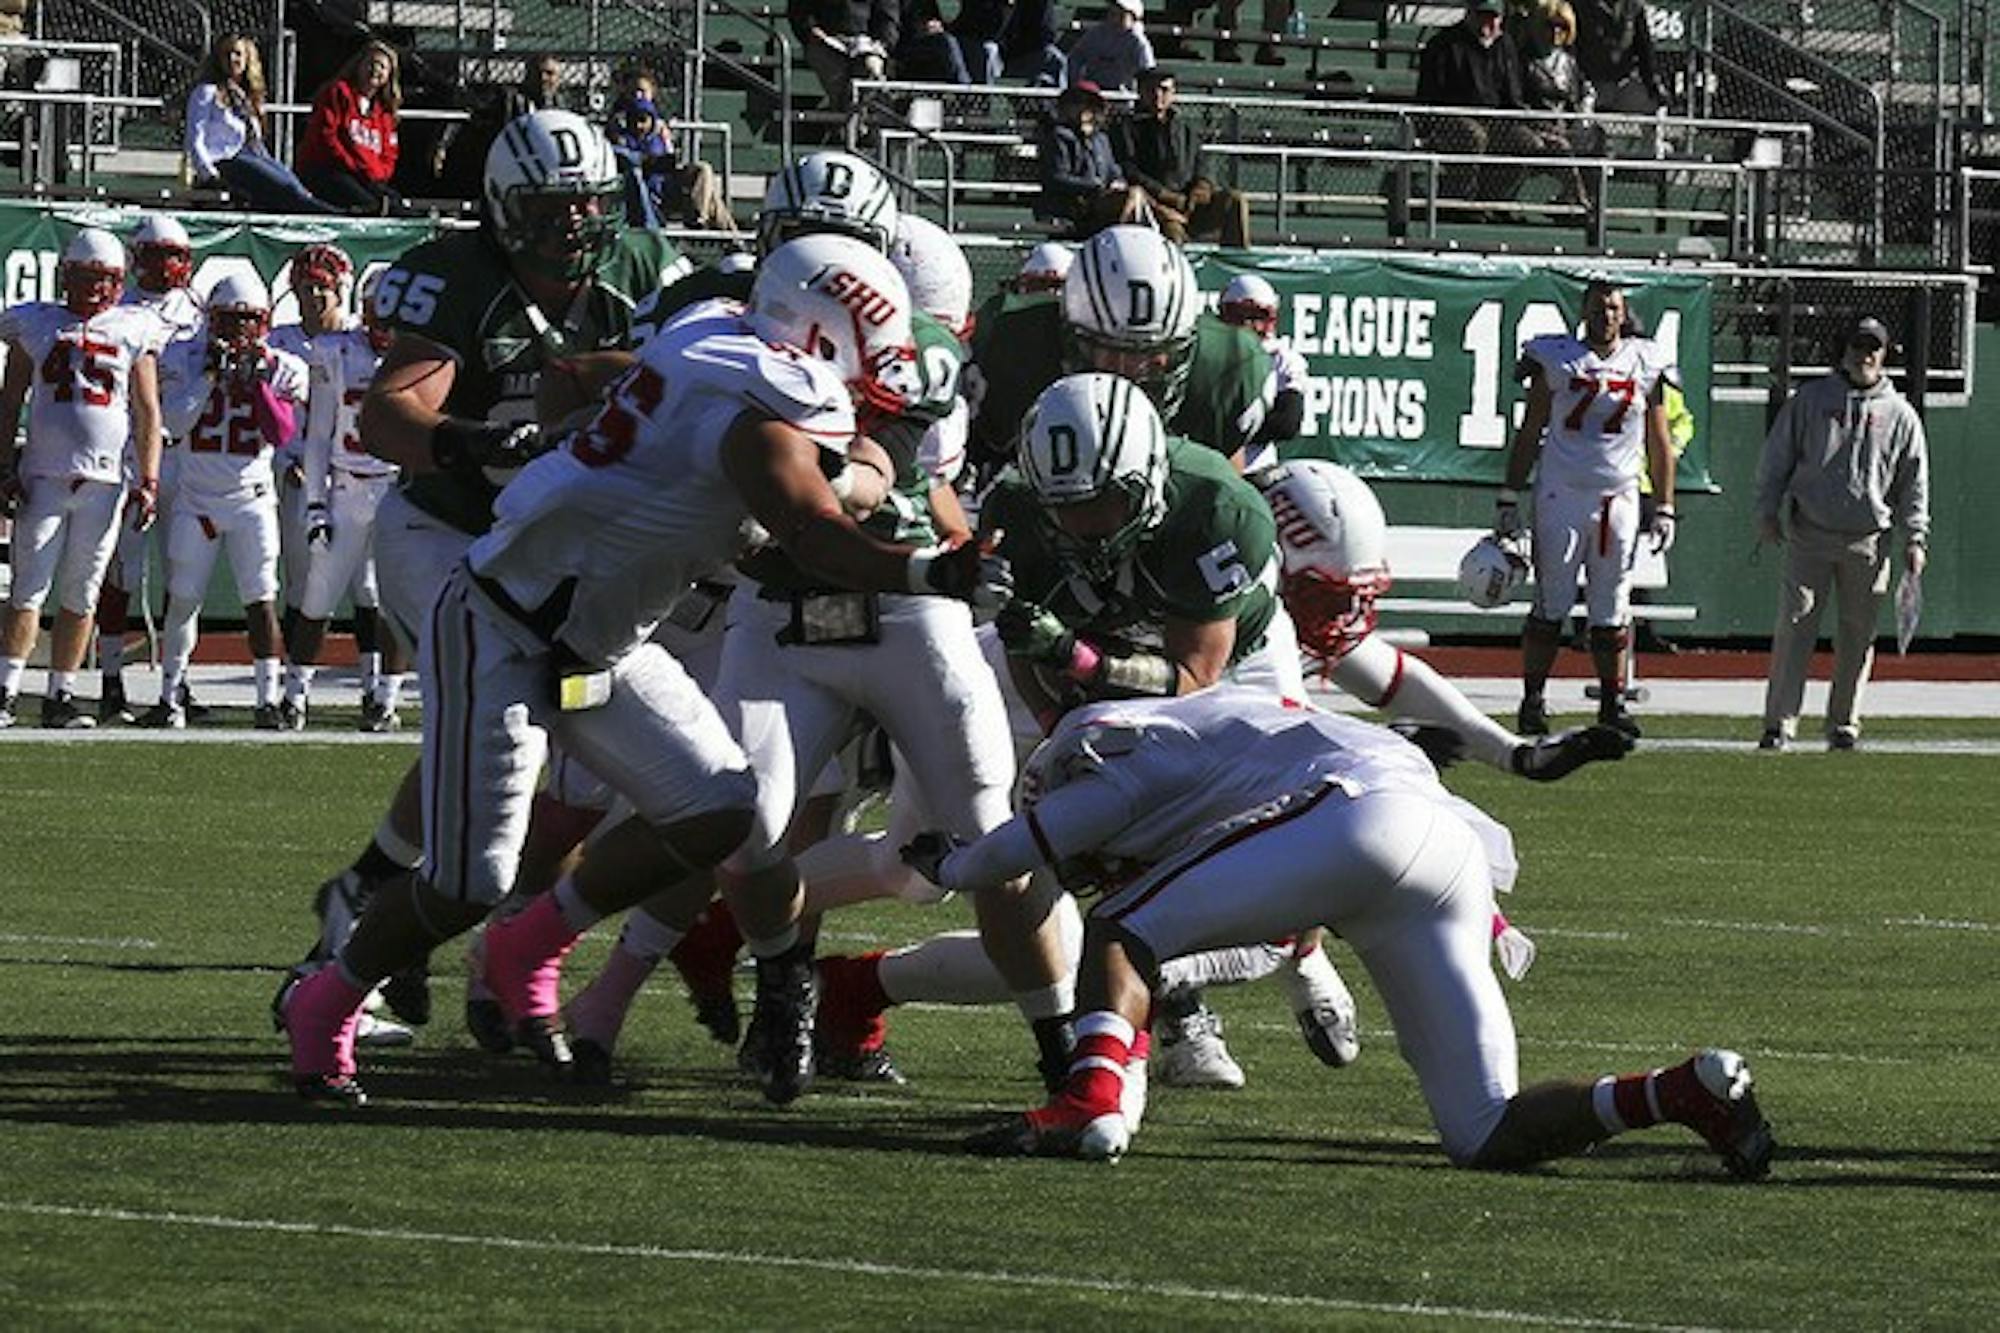 Dartmouth will take on Harvard in the Homecoming game on Saturday. The loser will almost certainly be eliminated from Ivy League title contention.